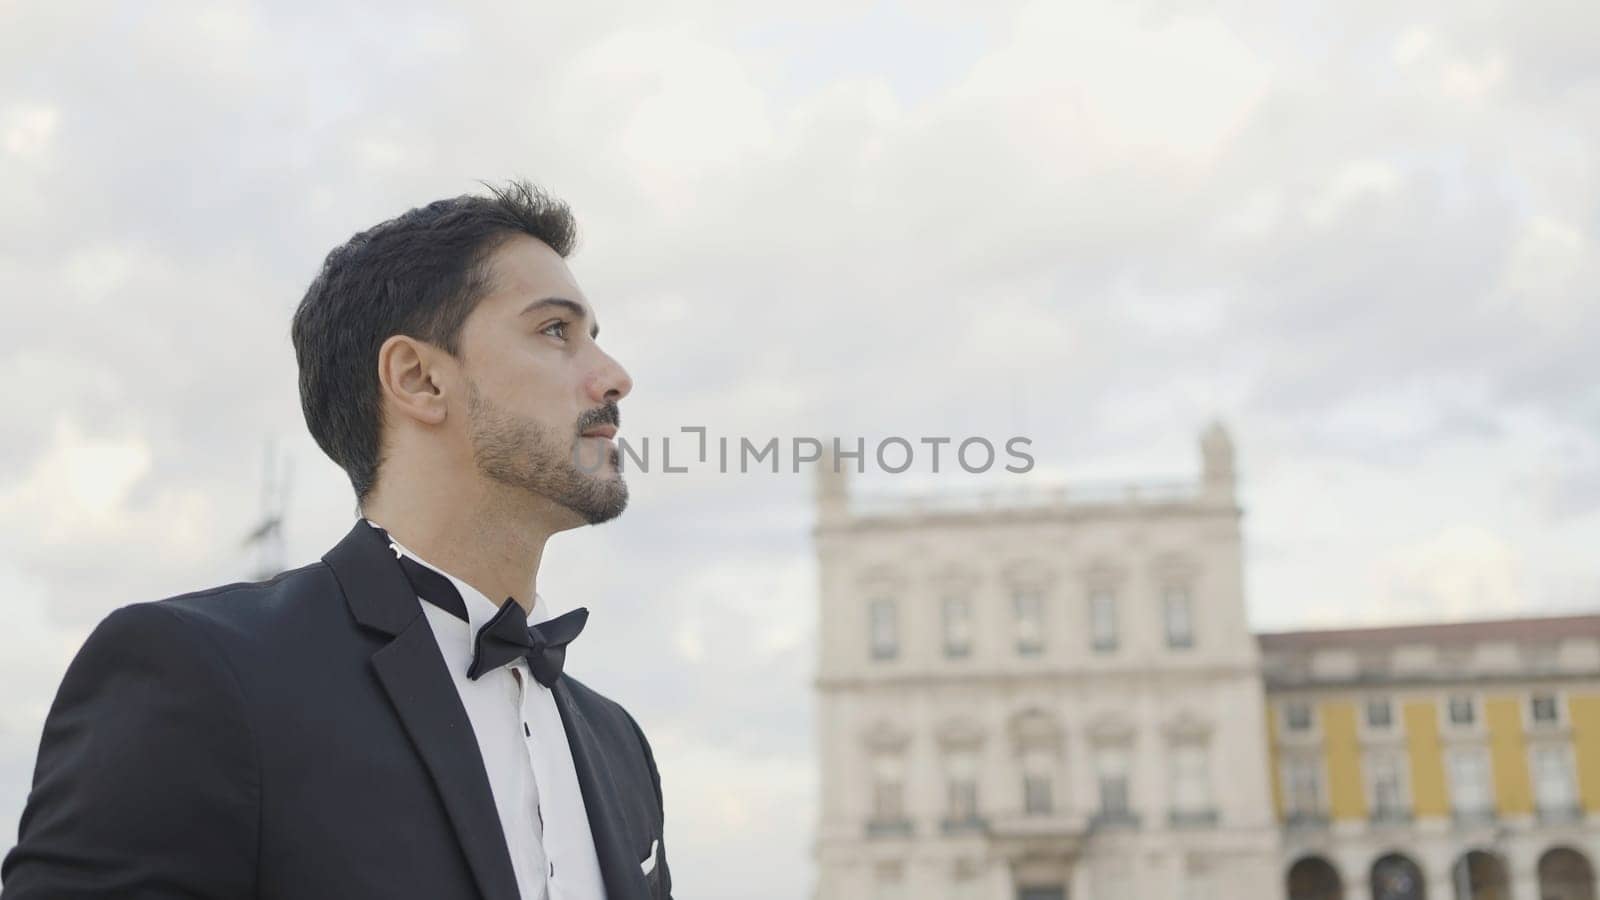 Handsome man in suit walks down street on summer day. Action. Attractive man in suit goes on date or event. Elegant man in suit walks confidently down street.